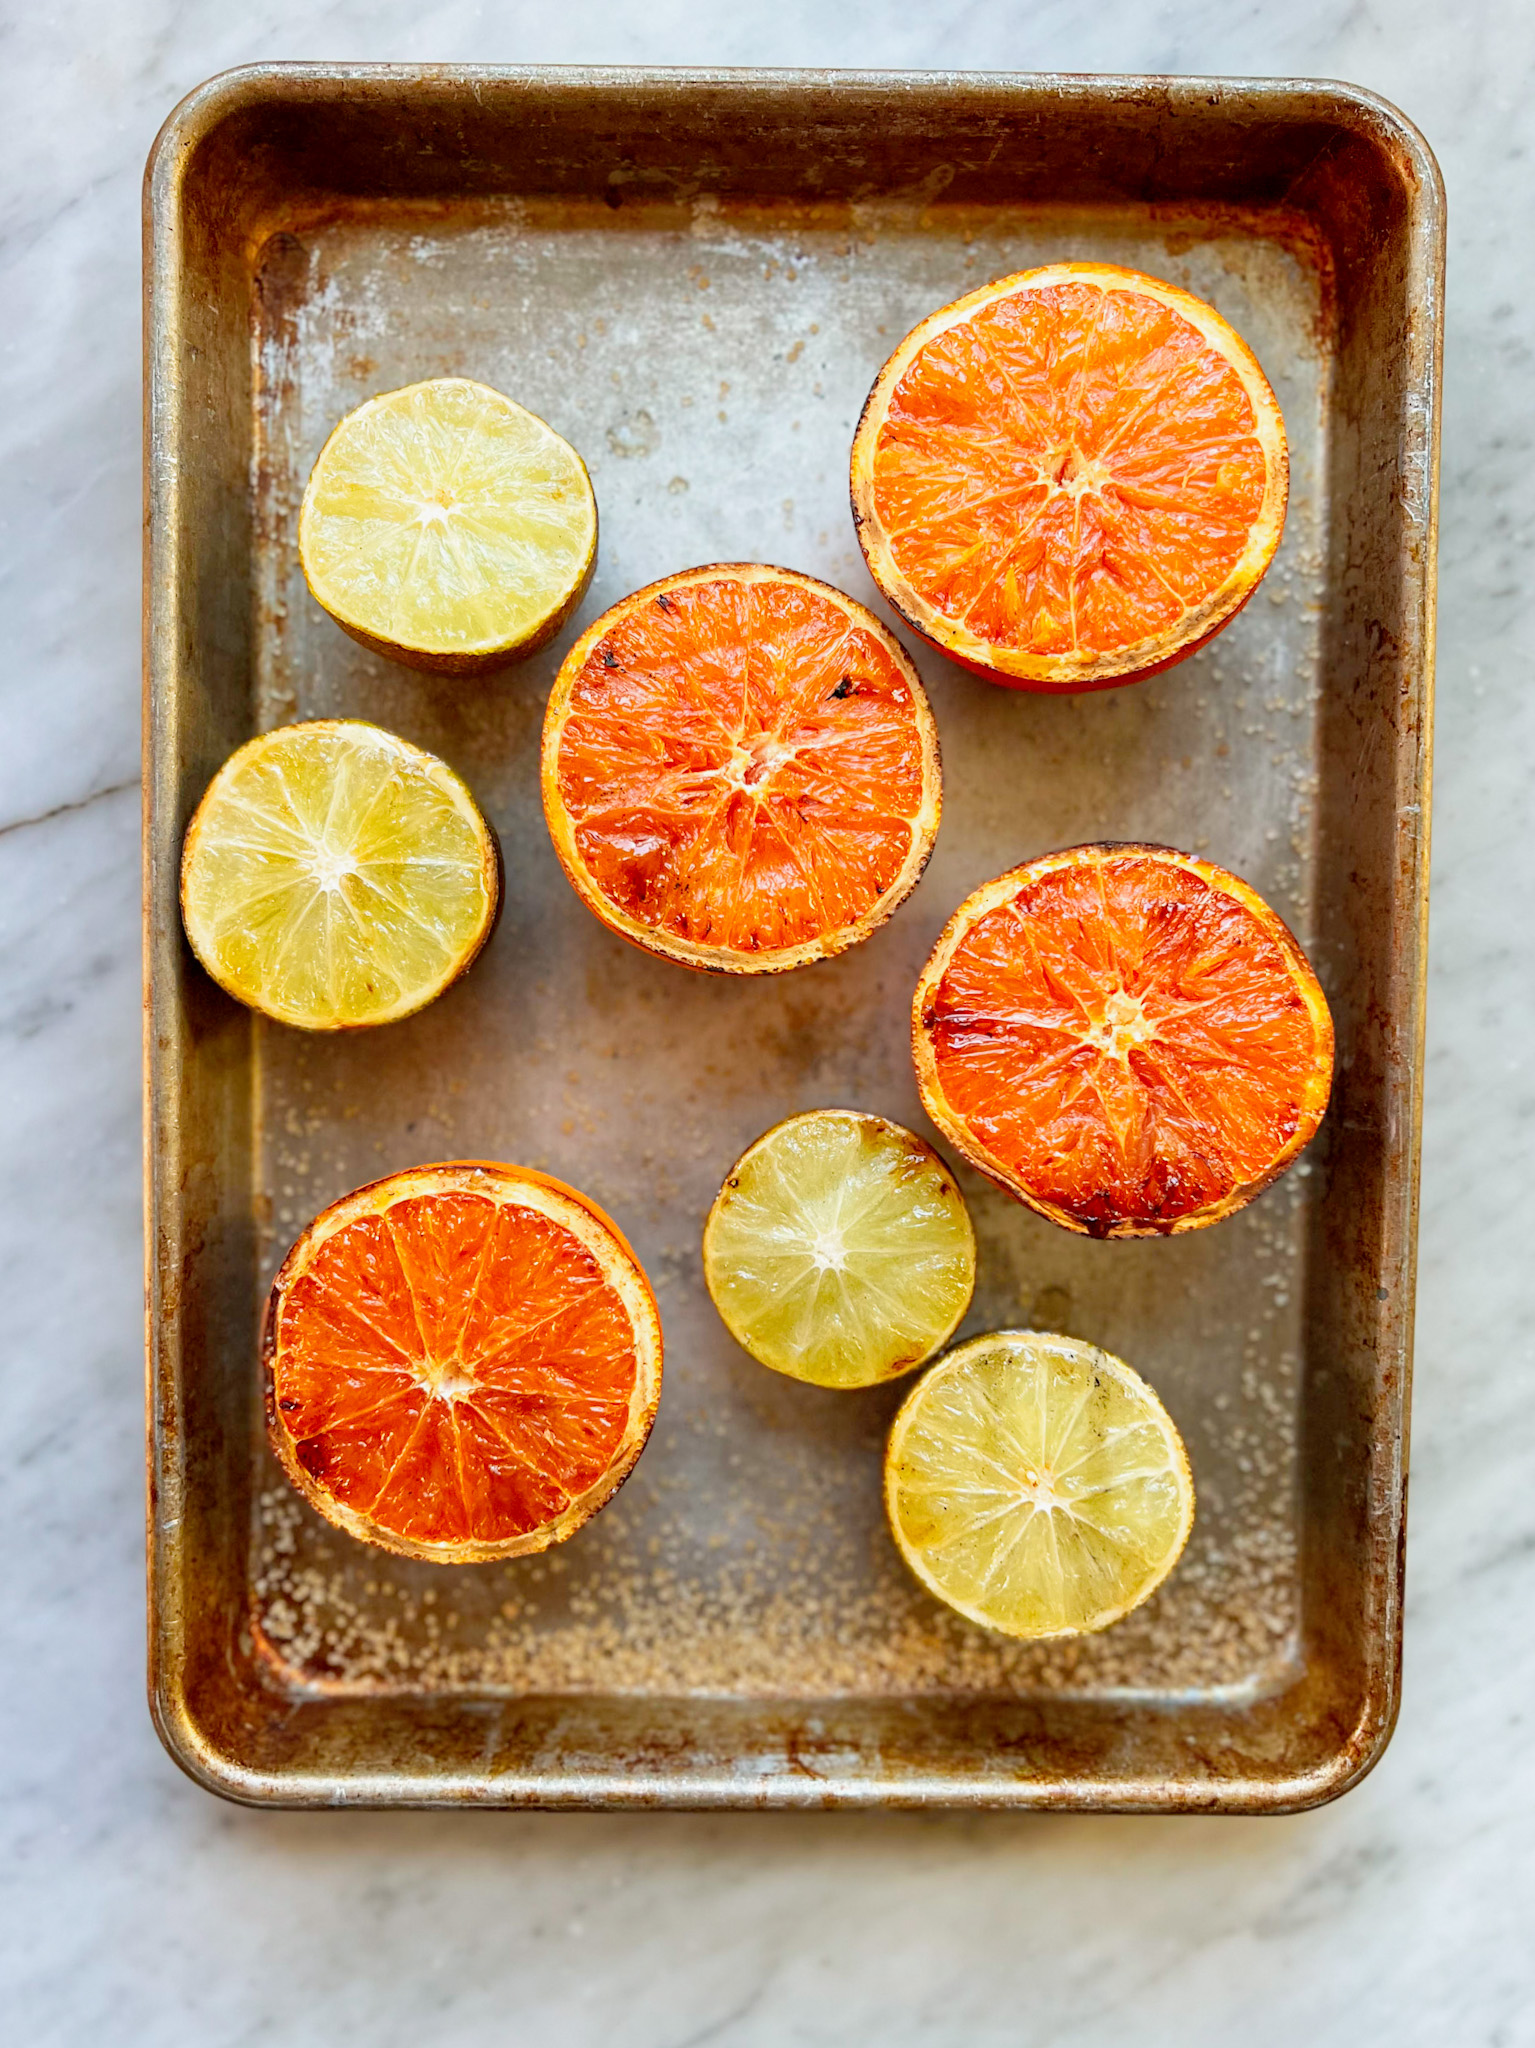 smoked oranges and limes on a sheet pan